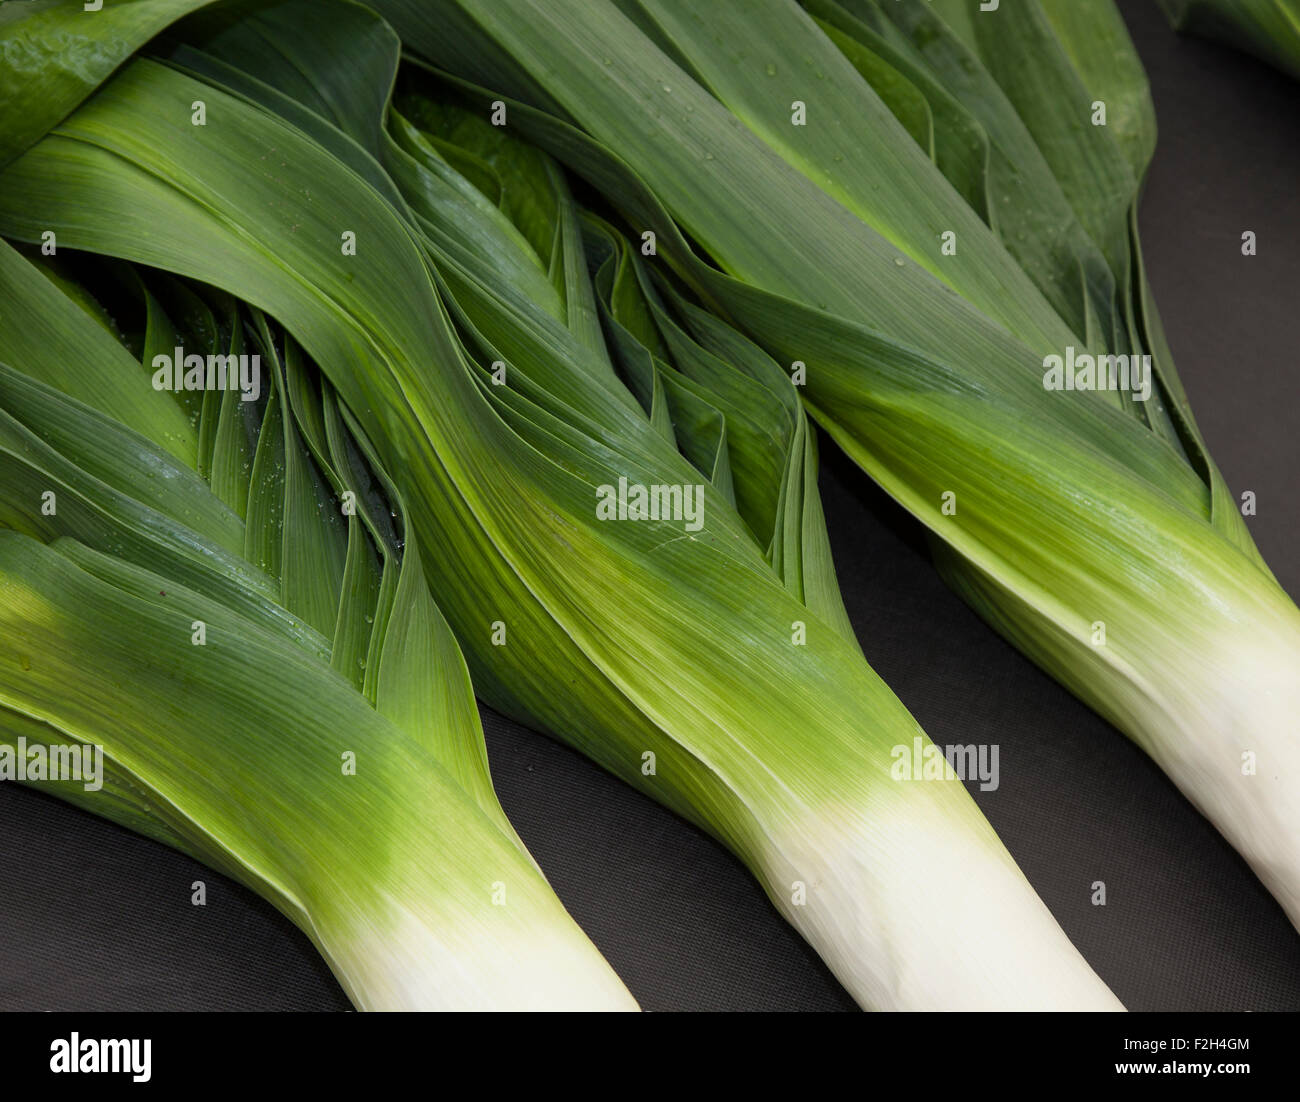 Harrogate, Yorkshire, UK. 18th Sept, 2015. Harrogate Annual Autumn Flower Show, attractions include the giant leeks vegetable competition, and is ranked as one of Britain's top three gardening events. Stock Photo